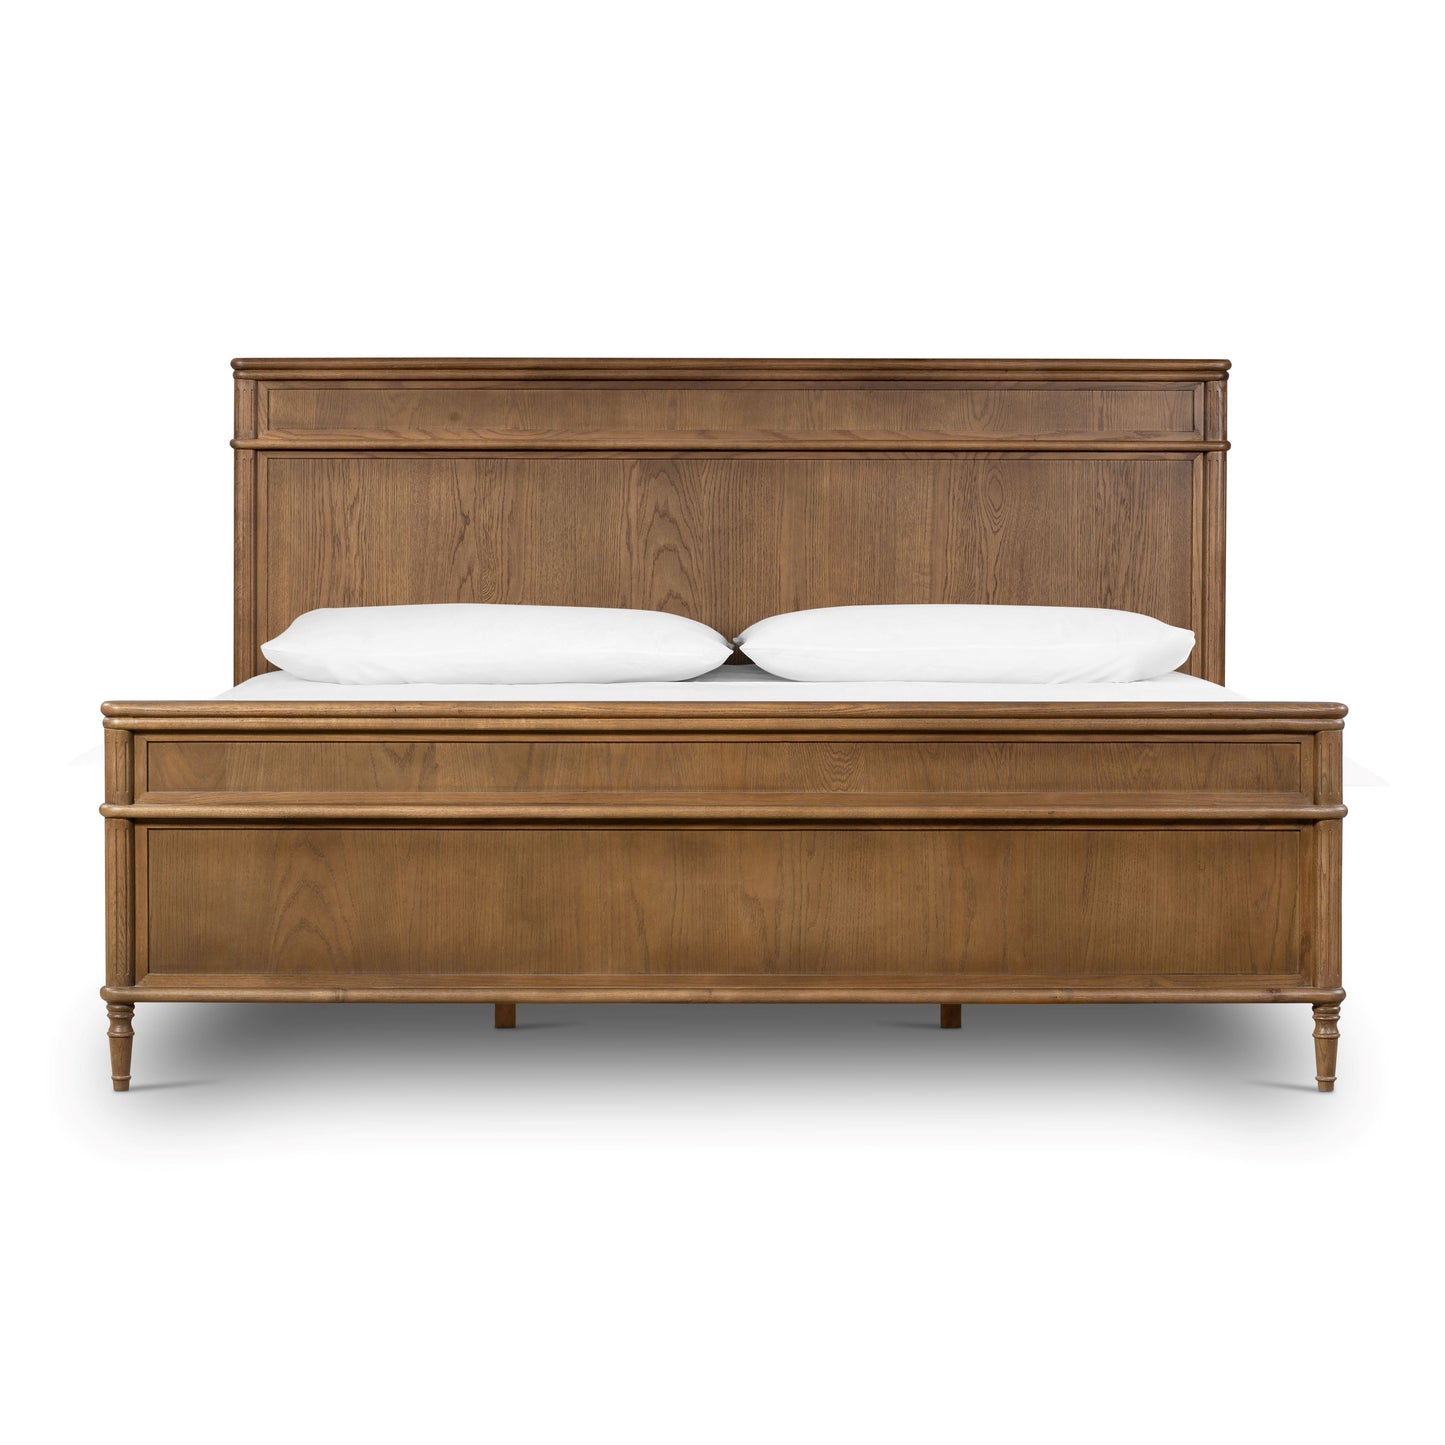 TOULOUSE BED Bed Four Hands     Four Hands, Mid Century Modern Furniture, Old Bones Furniture Company, Old Bones Co, Modern Mid Century, Designer Furniture, https://www.oldbonesco.com/